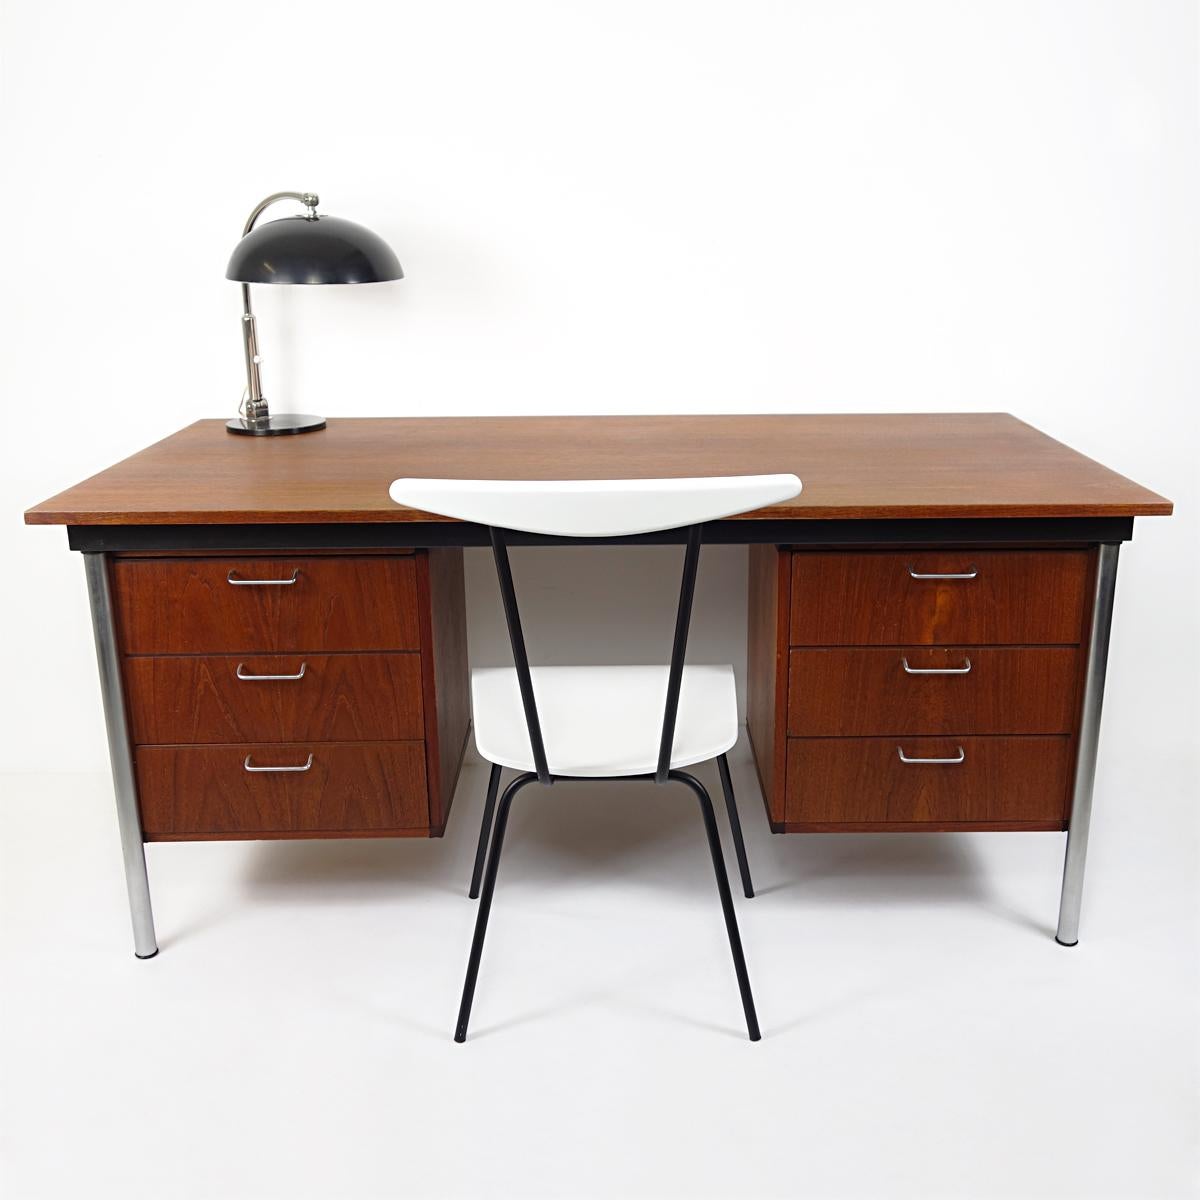 Beautifully designed desk by Cees Braakman for Pastoe with high levels of practicality and comfort.
It has six drawers, three of each side of the seating position. 
The exterior looks are sleek and business like whilst the interior looks very